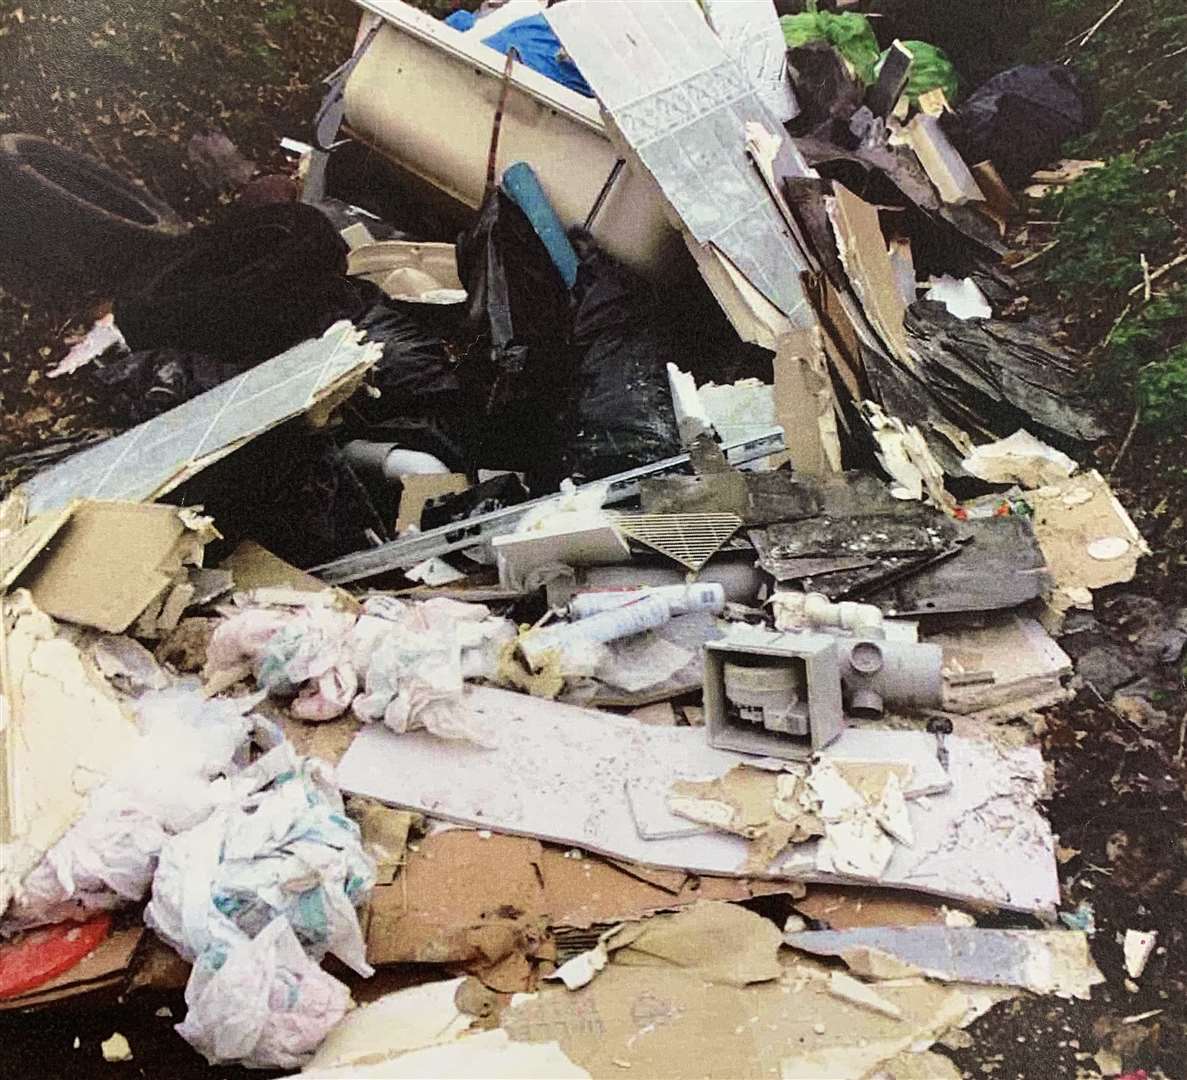 Waste was also discovered in Common Road, Rochester. Picture: Medway Council